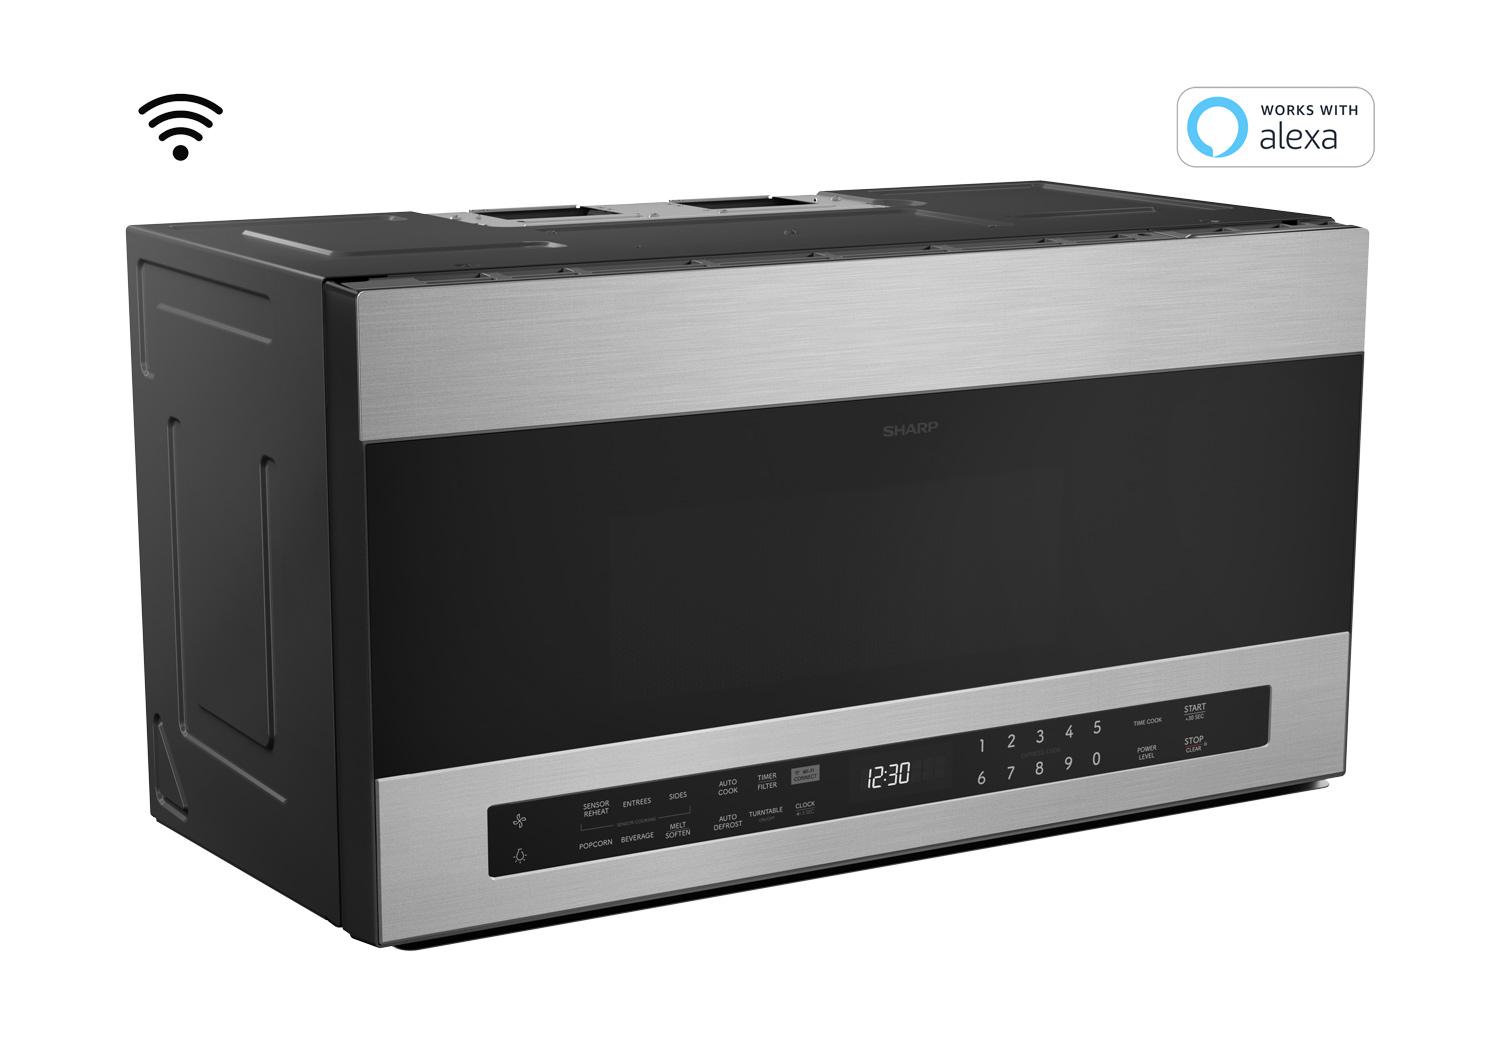 1.9 cu. ft. Smart Over-the-Range-Microwave Oven (SMO1969JS)